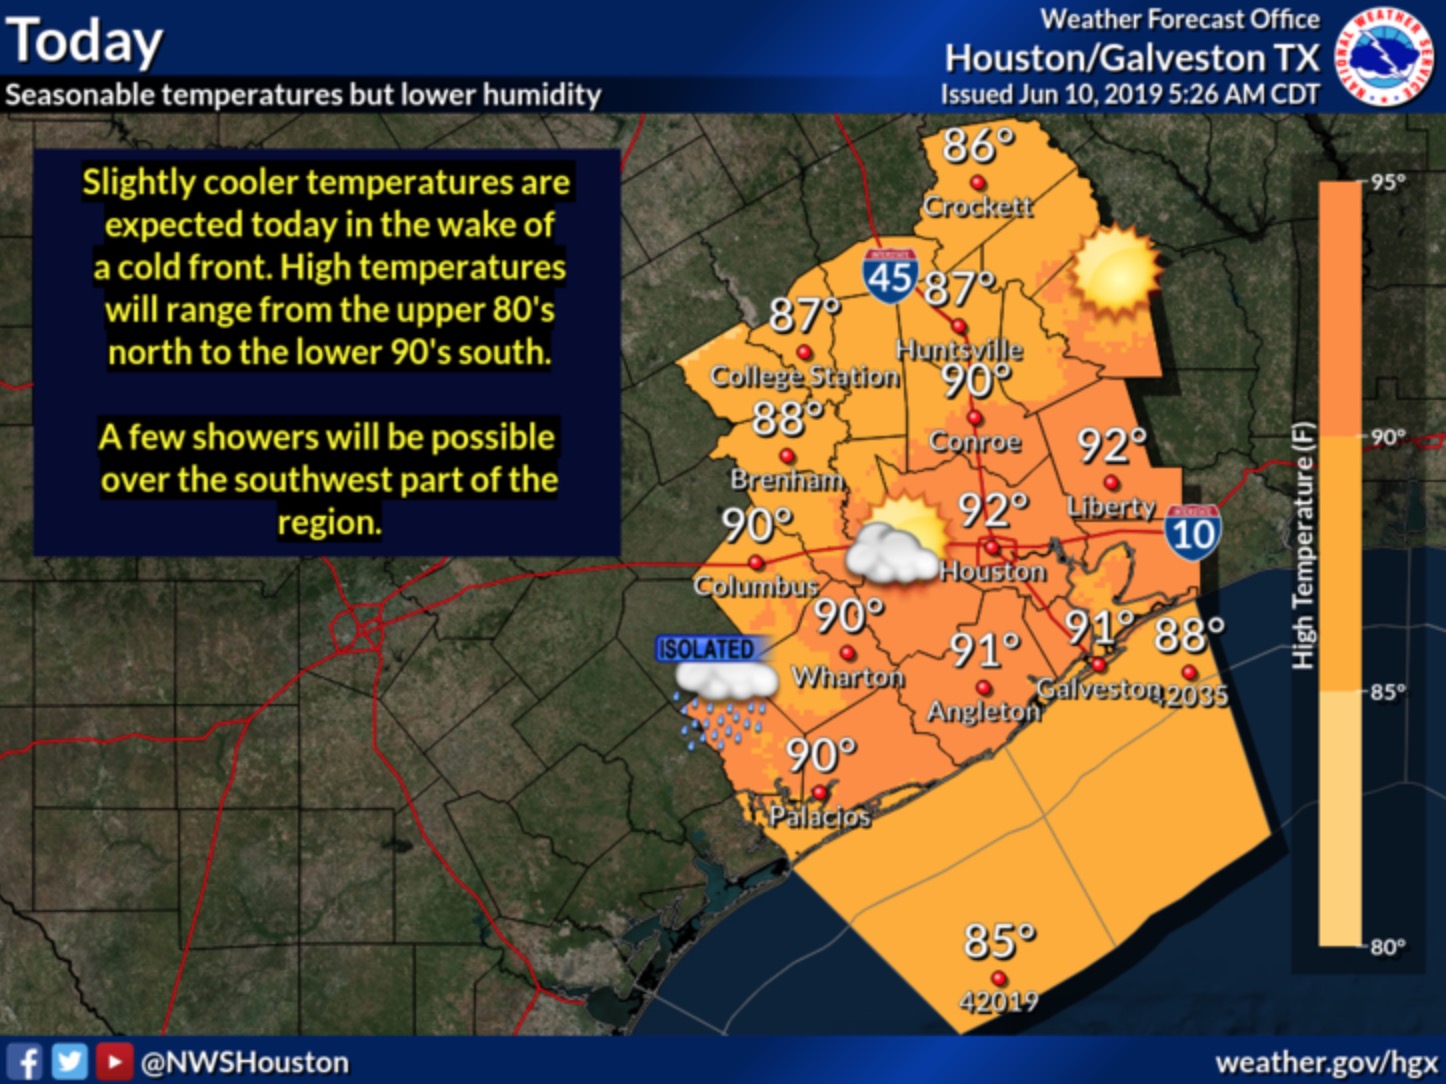 ‘Cold front’ plunges Houston temps into low 90s